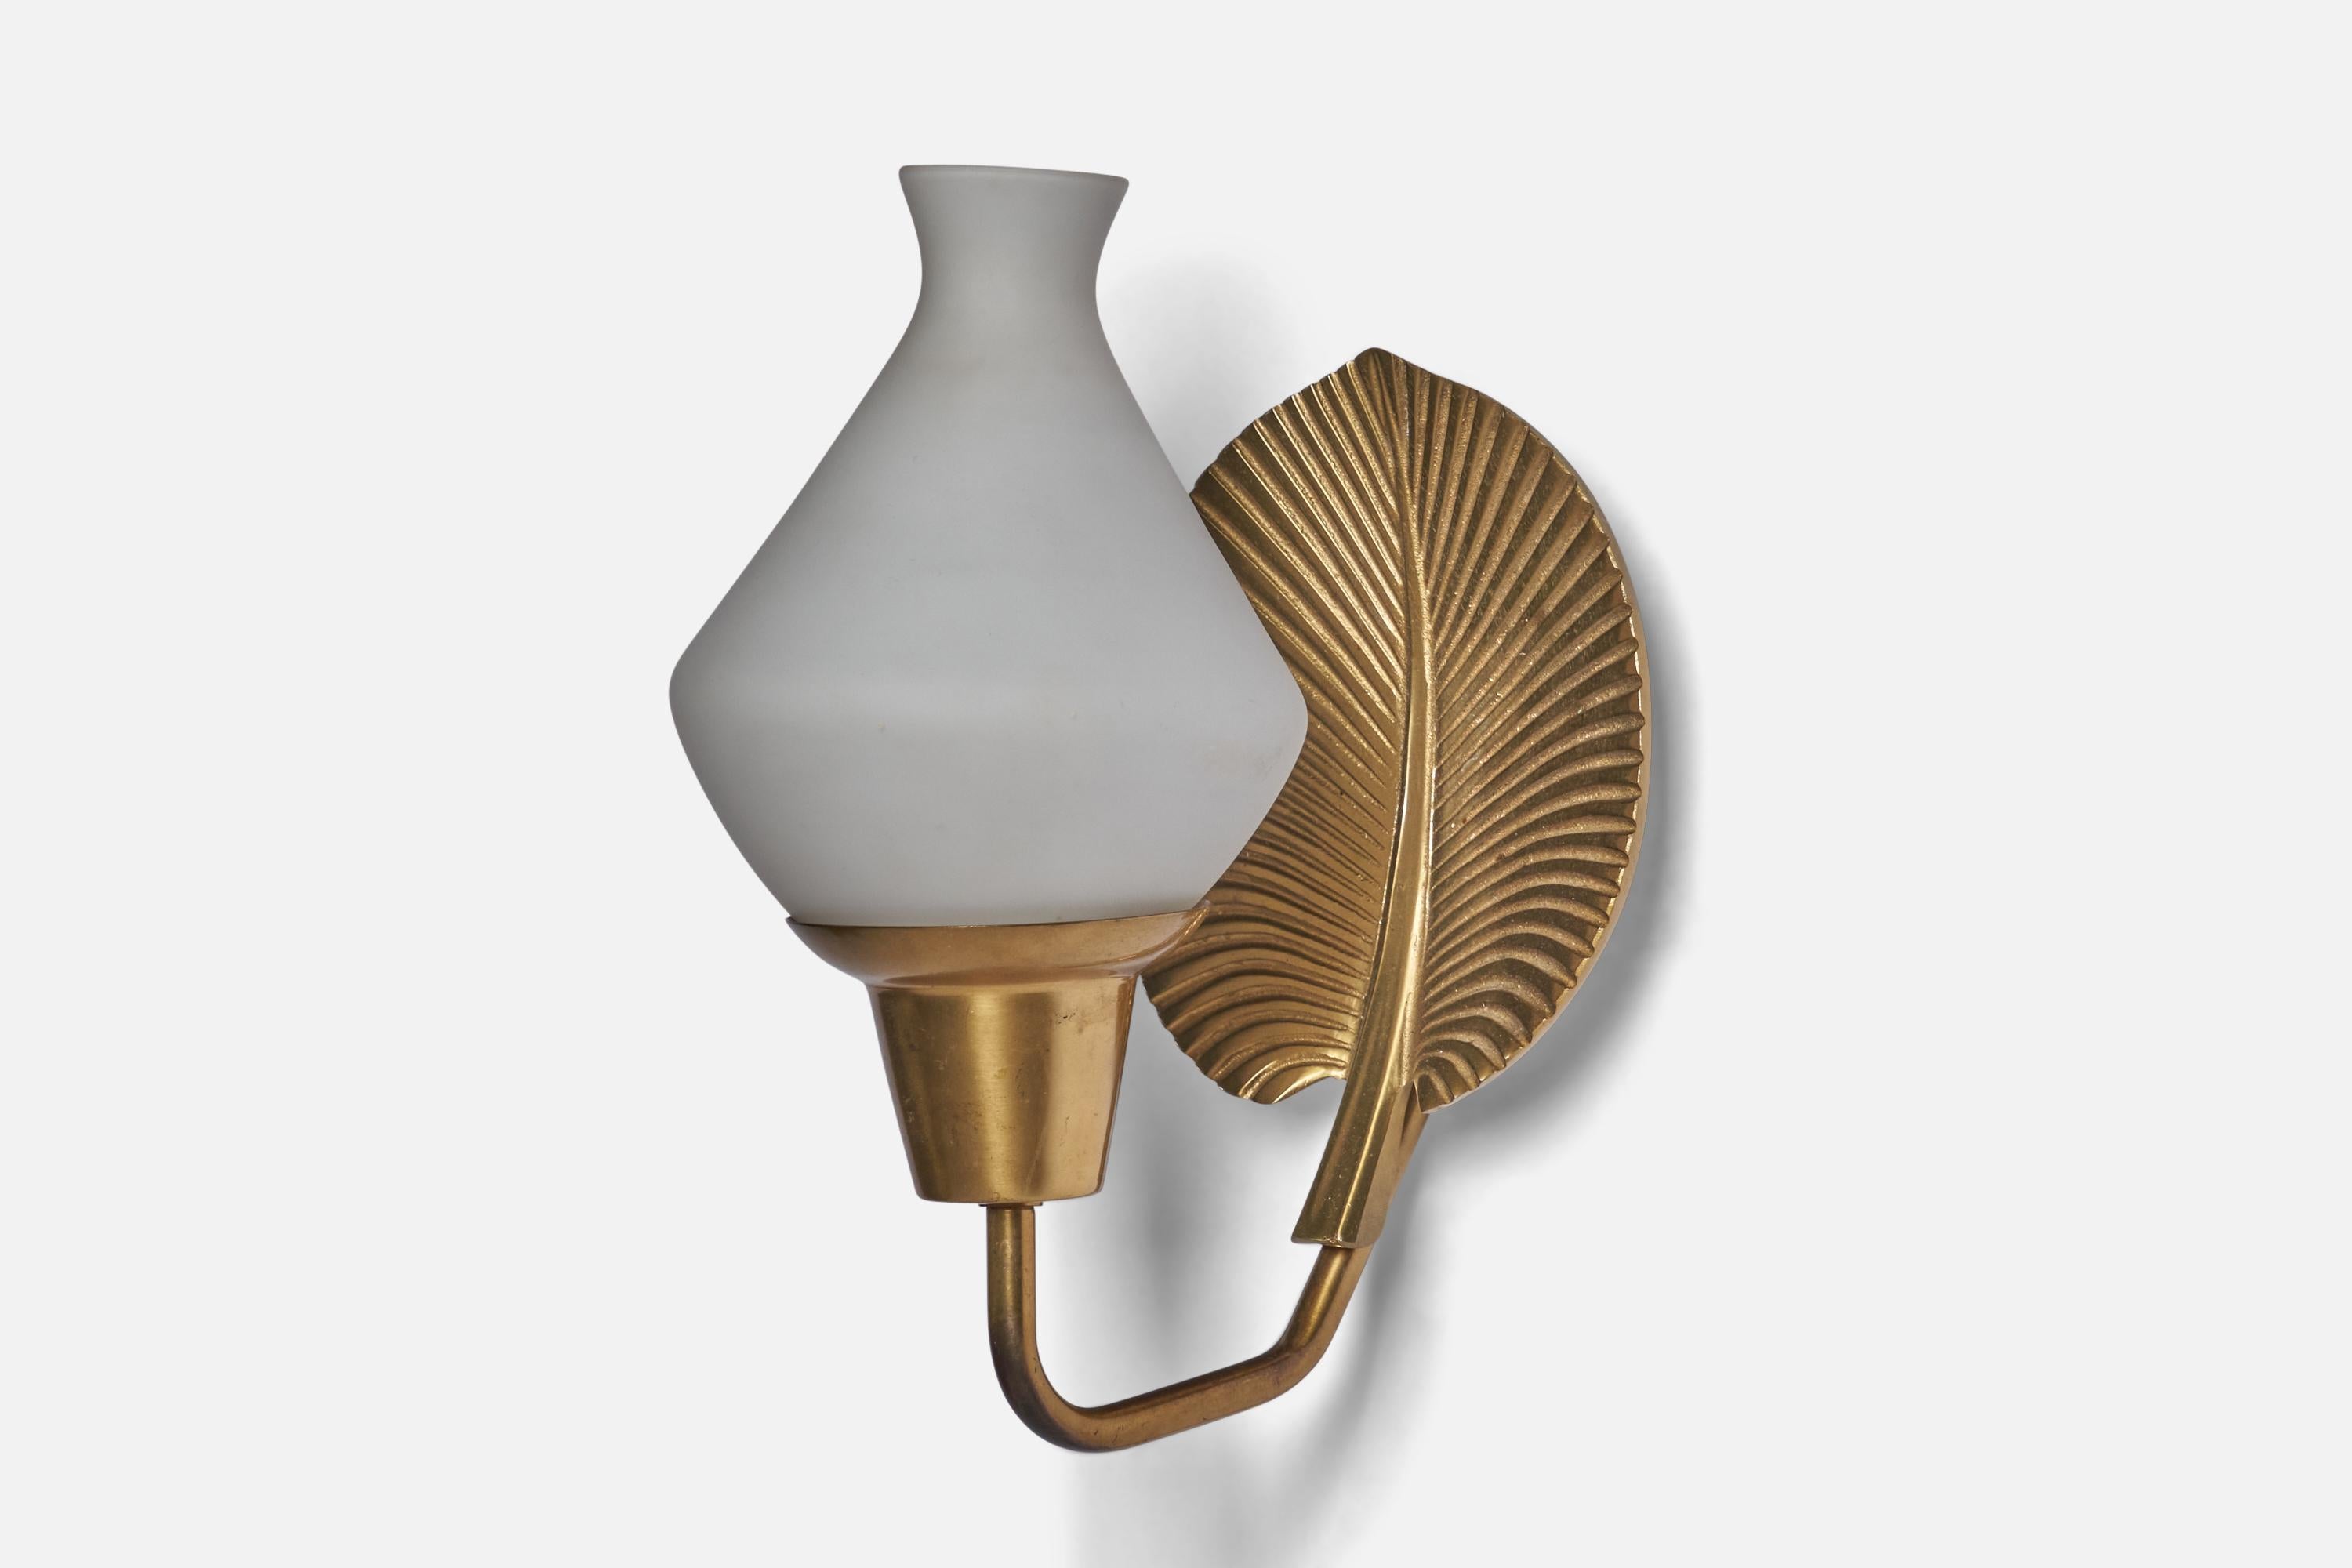 A brass and opaline glass wall light designed and produced by ASEA, Sweden, 1940s.

Overall Dimensions (inches): 11” H x 5.6” W x 8” D
Back Plate Dimensions (inches): 2.75” H x 2.6” W
Bulb Specifications: E-26 Bulb
Number of Sockets: 1
All lighting